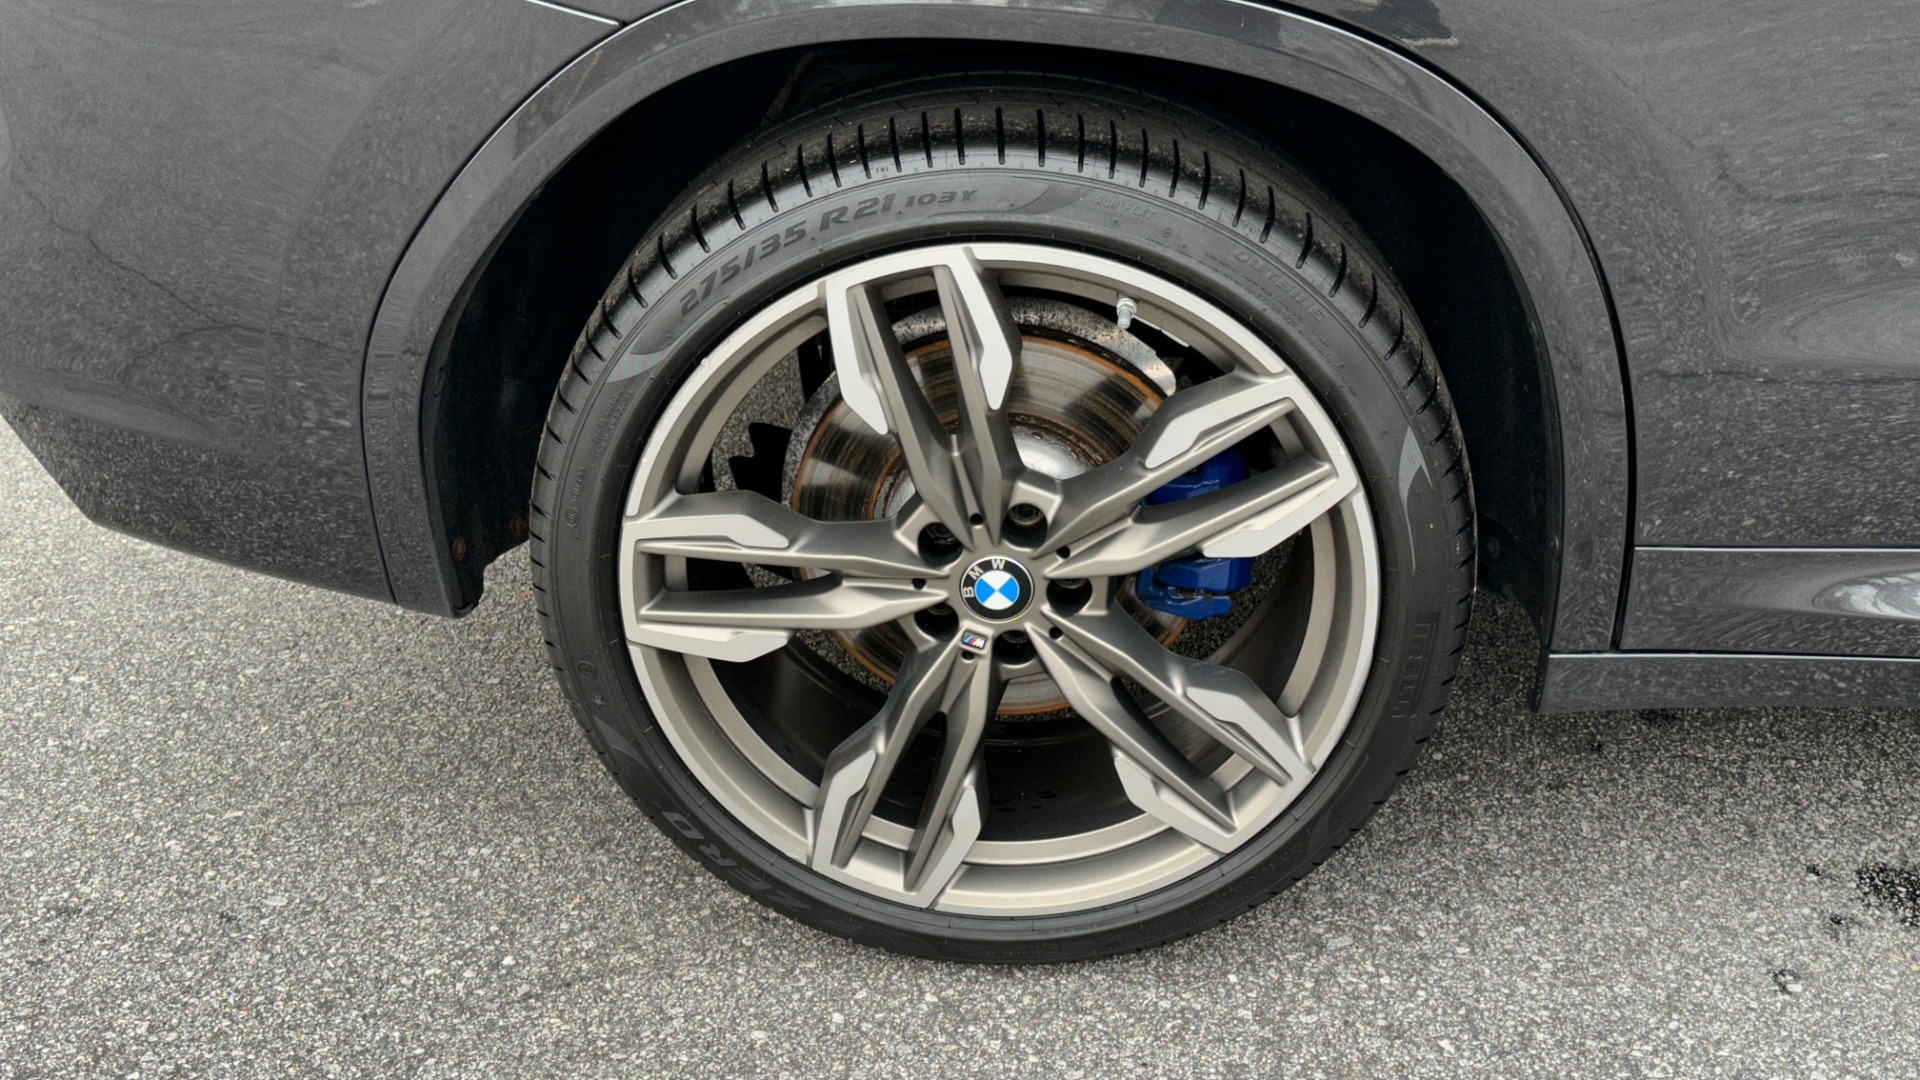 Used 2019 BMW X3 M40i / 21IN WHEELS / HEATED SEATS / NAVIGATION / HEATED STEERING for sale Sold at Formula Imports in Charlotte NC 28227 38